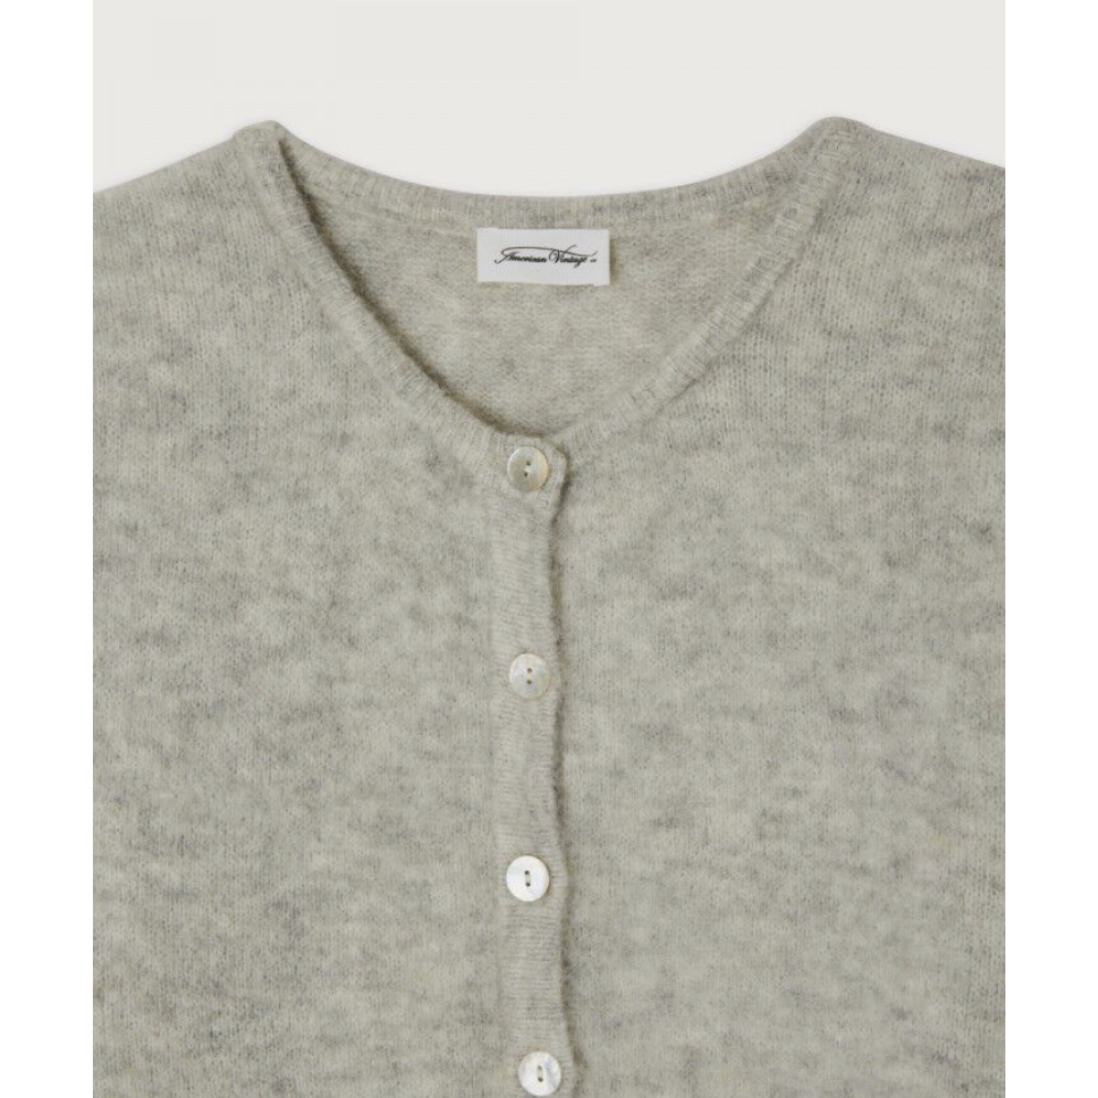 American Vintage Vitow Cardigan Heather grey - buy it now online in the UK from Stripesfashion. Close up detail